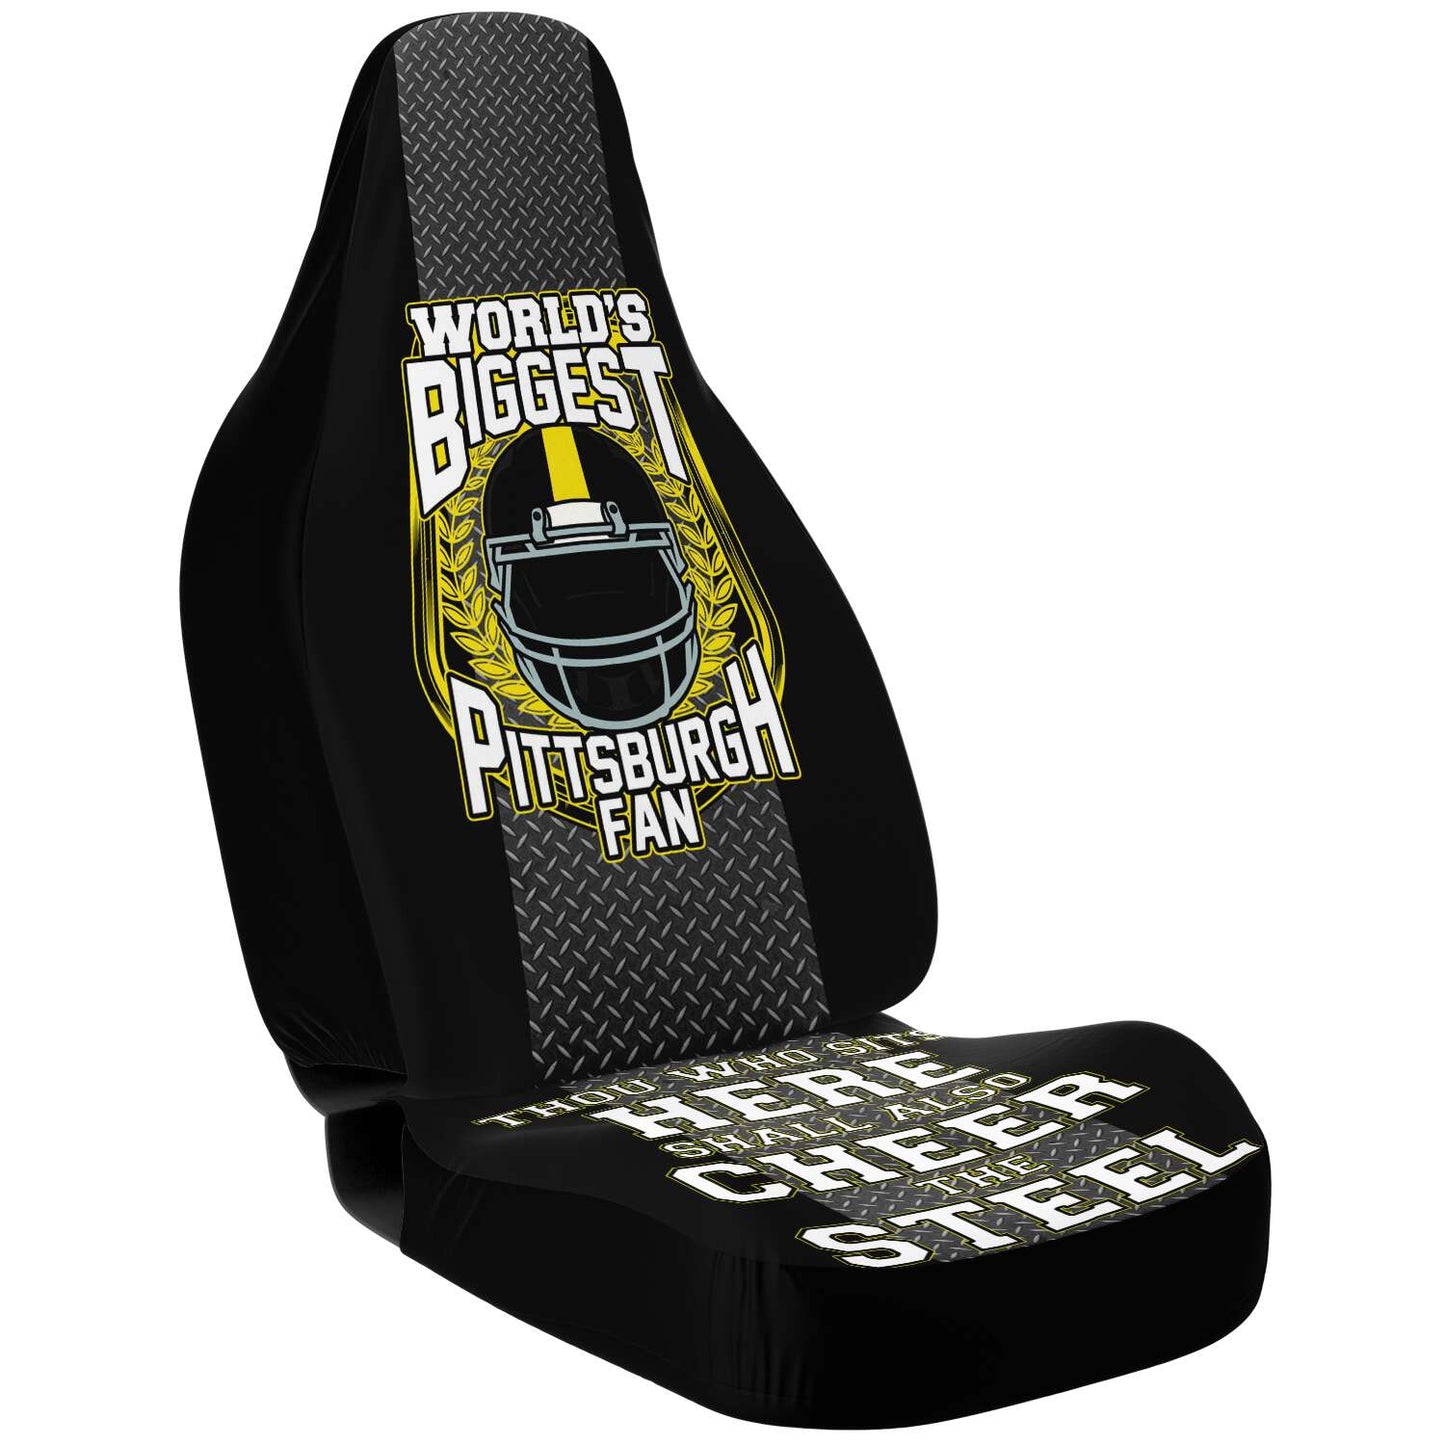 Worlds Biggest Pittsburgh Fan Car Seat Cover